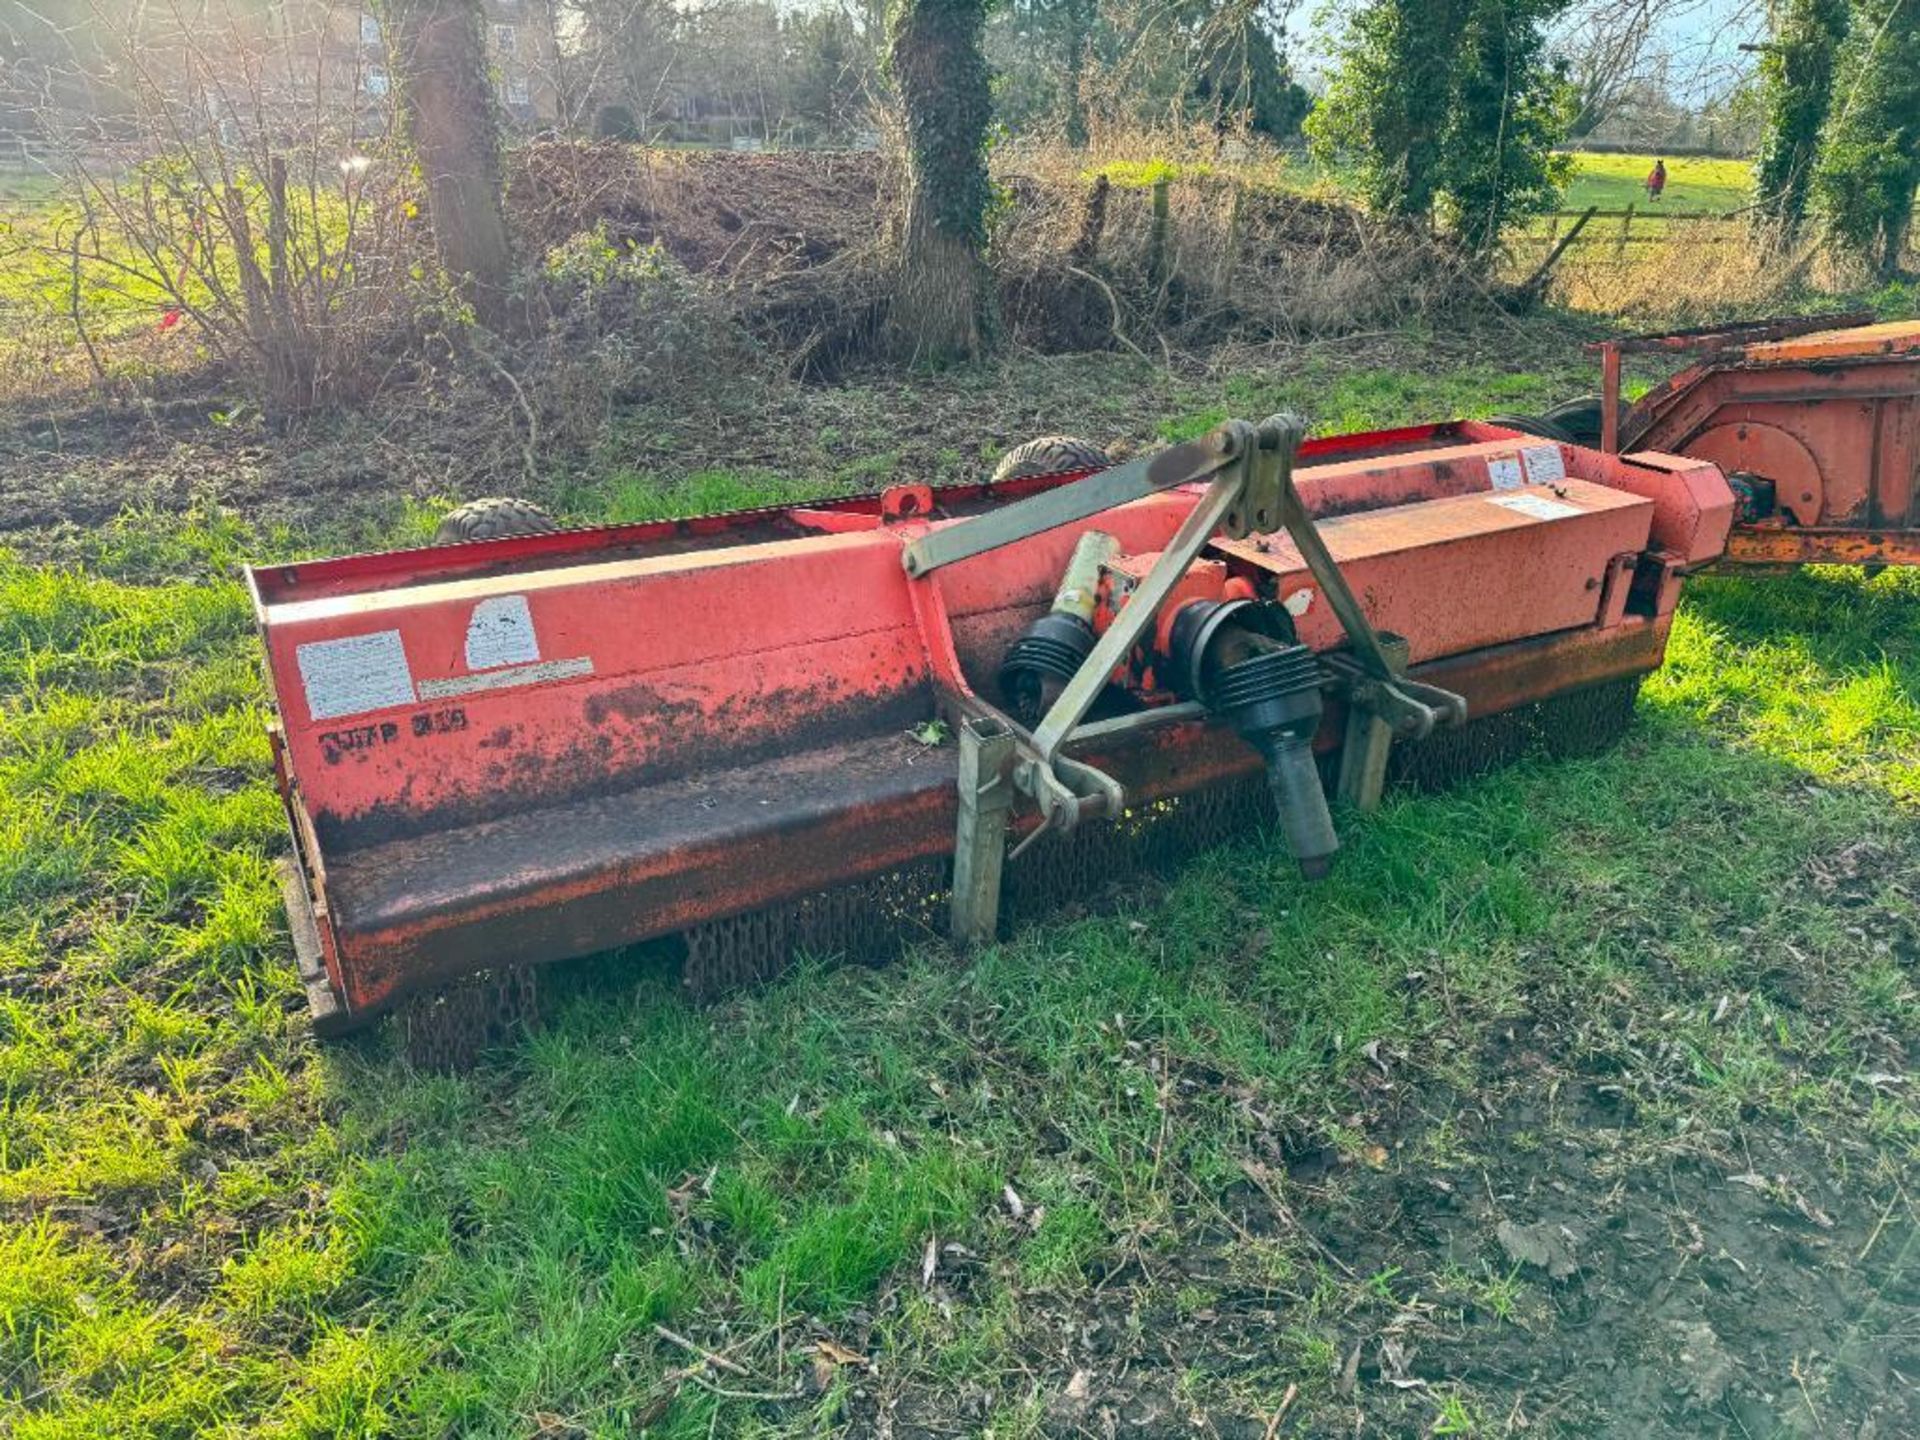 1993 Muratori MT7P 320 3.2m flail mower with spares blades. Serial No: 48503 - Image 3 of 10